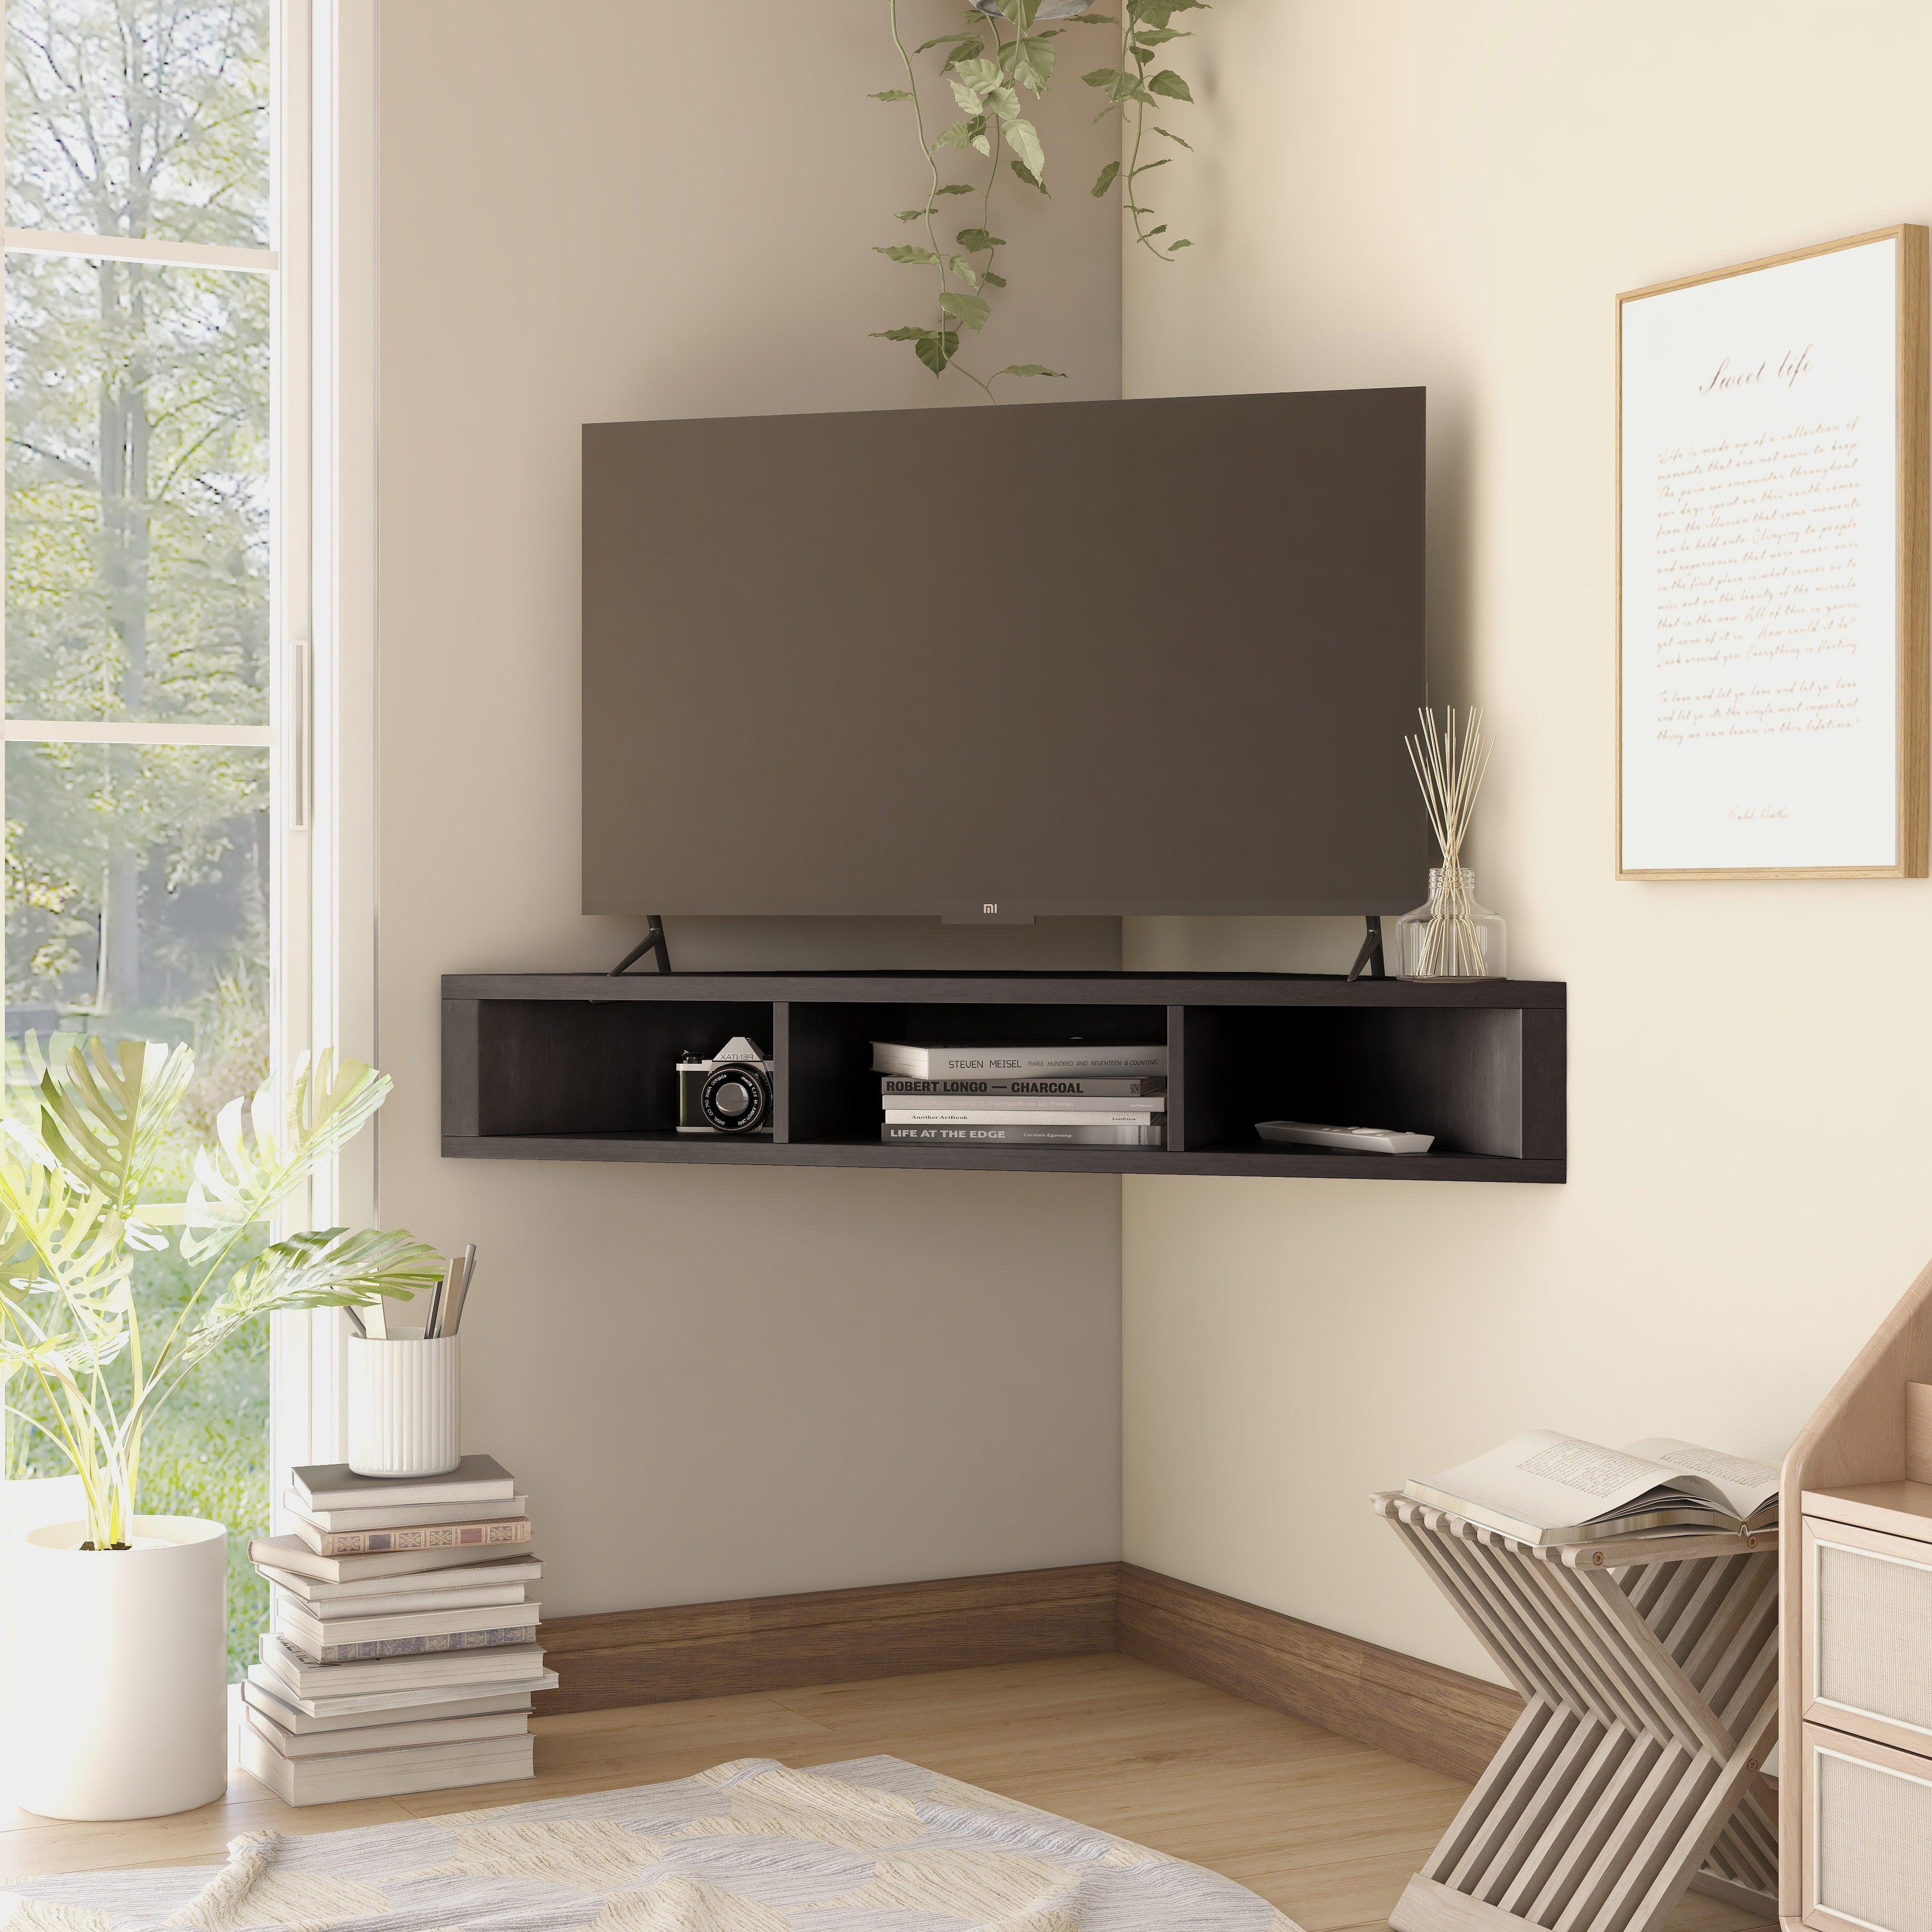 Corner TV Wall Mount With Shelves: Maximizing Space and Storage